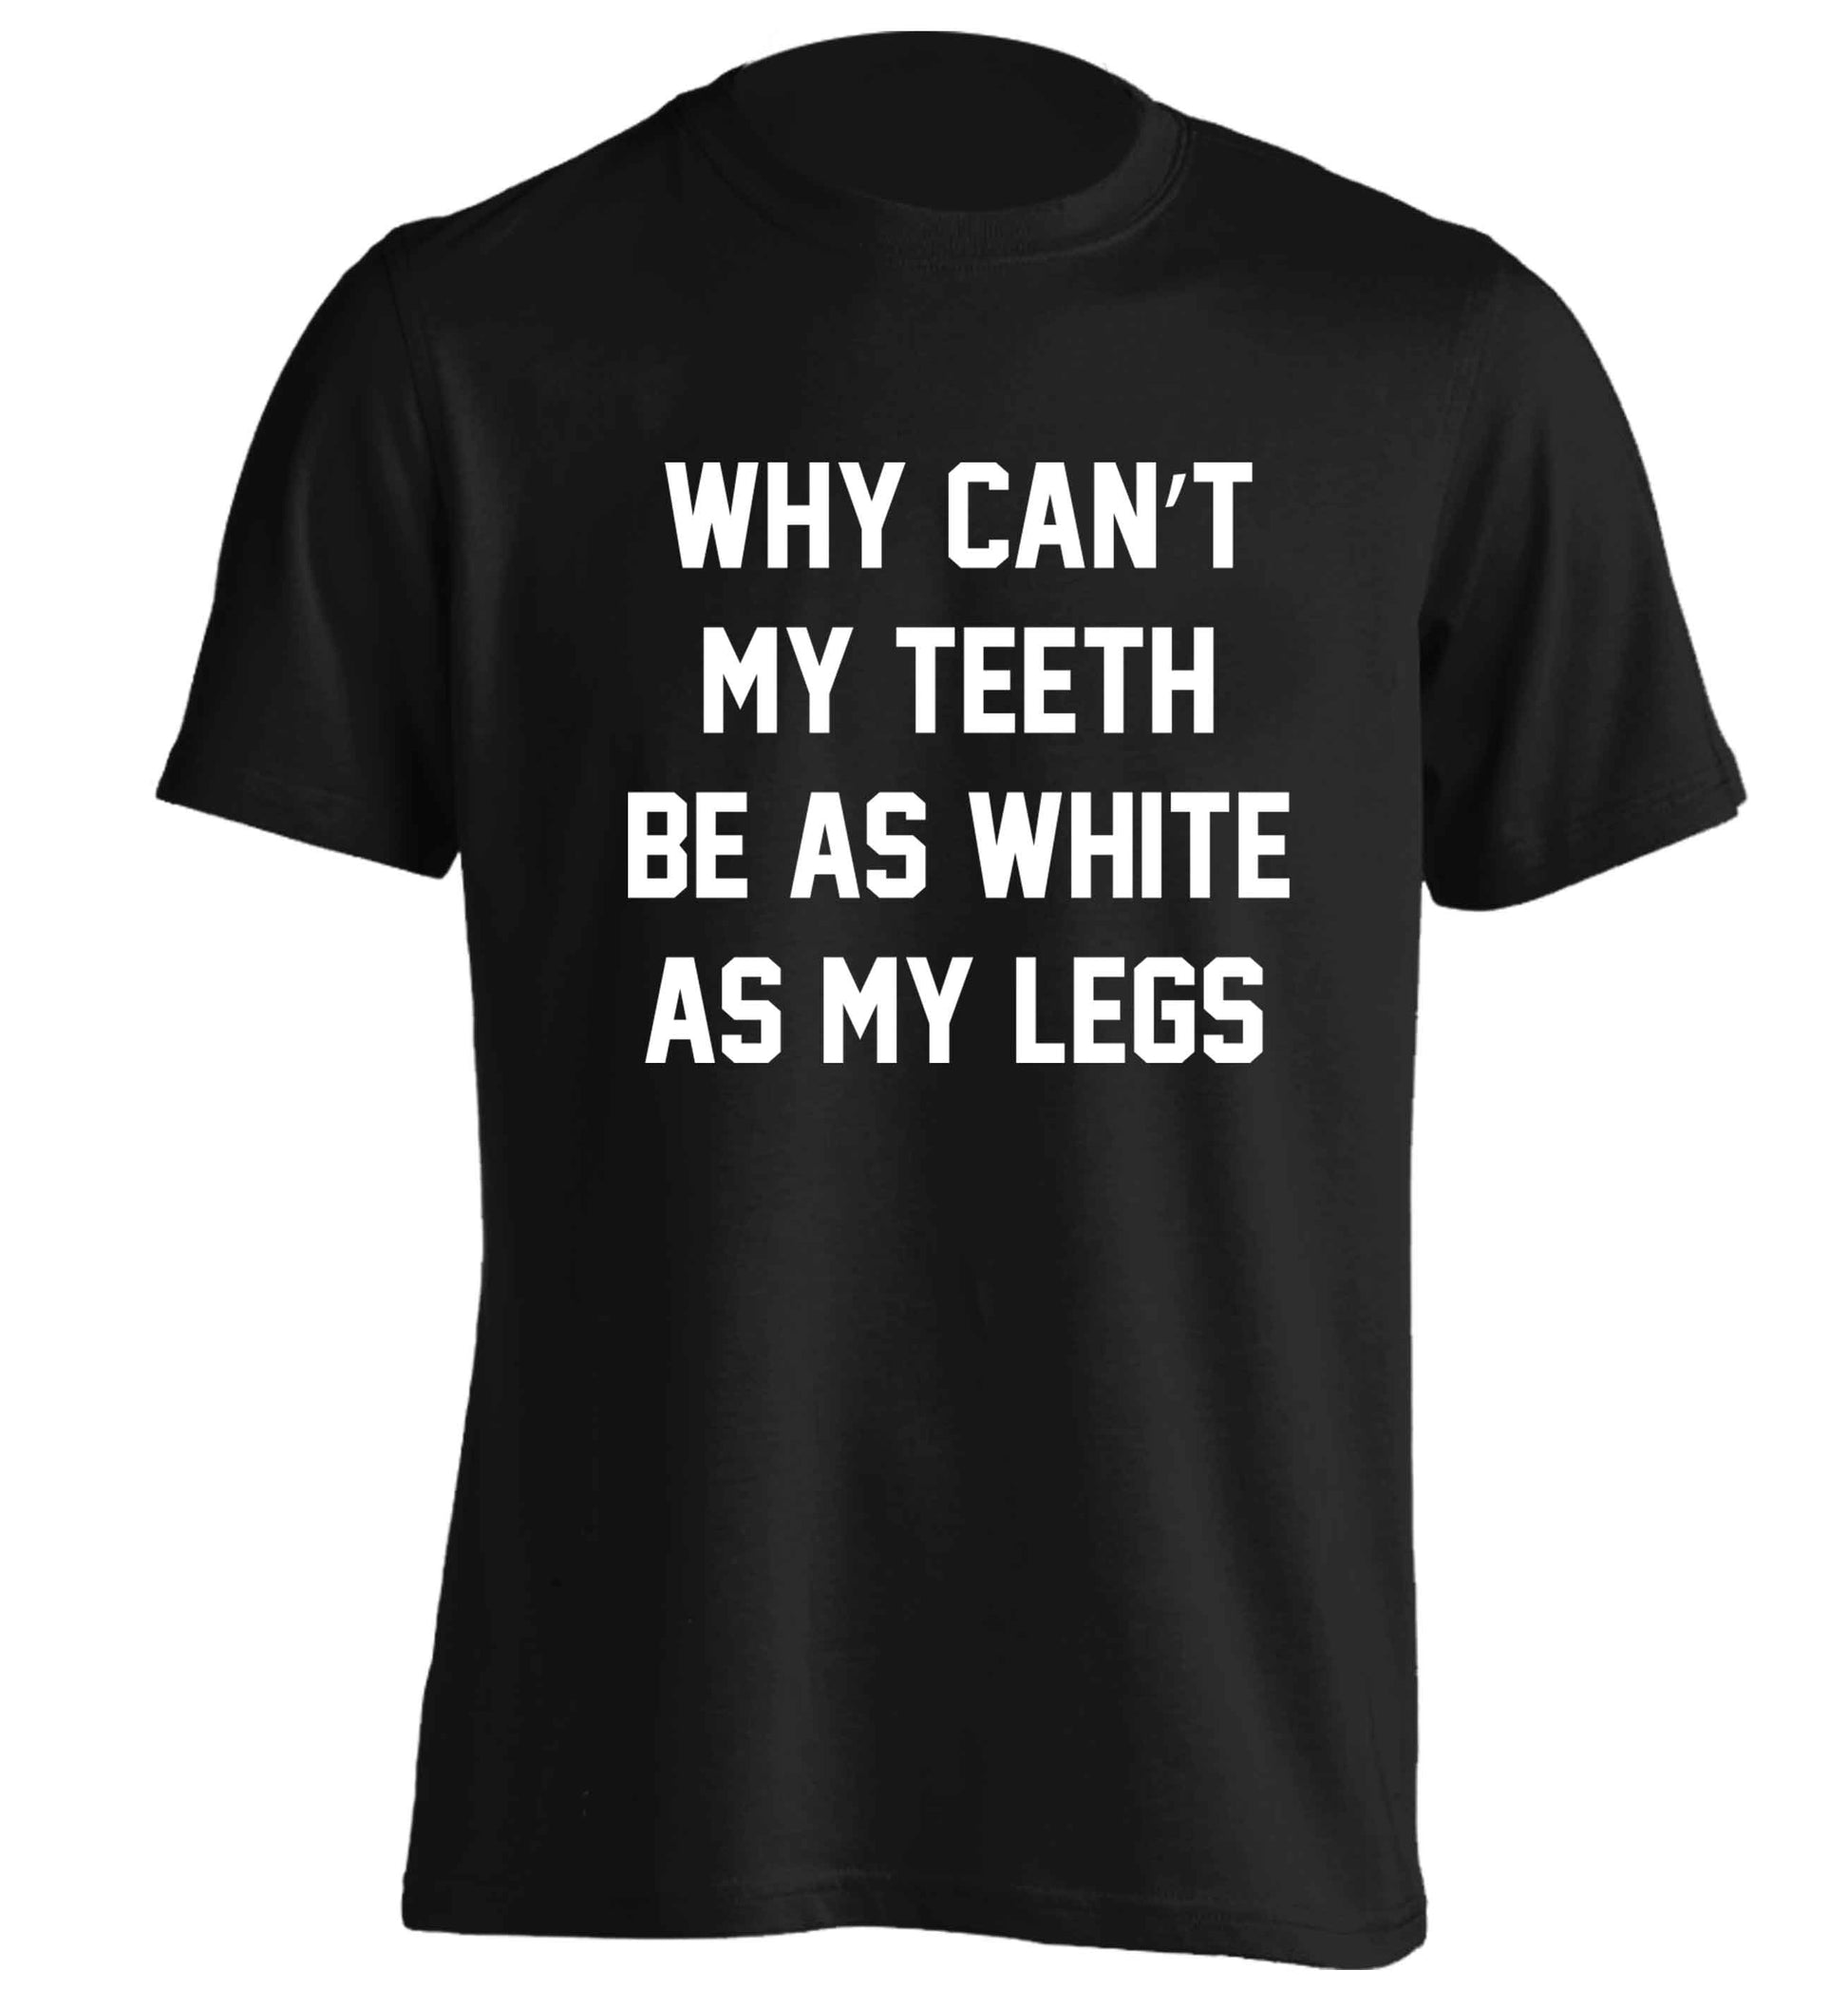 Why can't my teeth be as white as my legs adults unisex black Tshirt 2XL